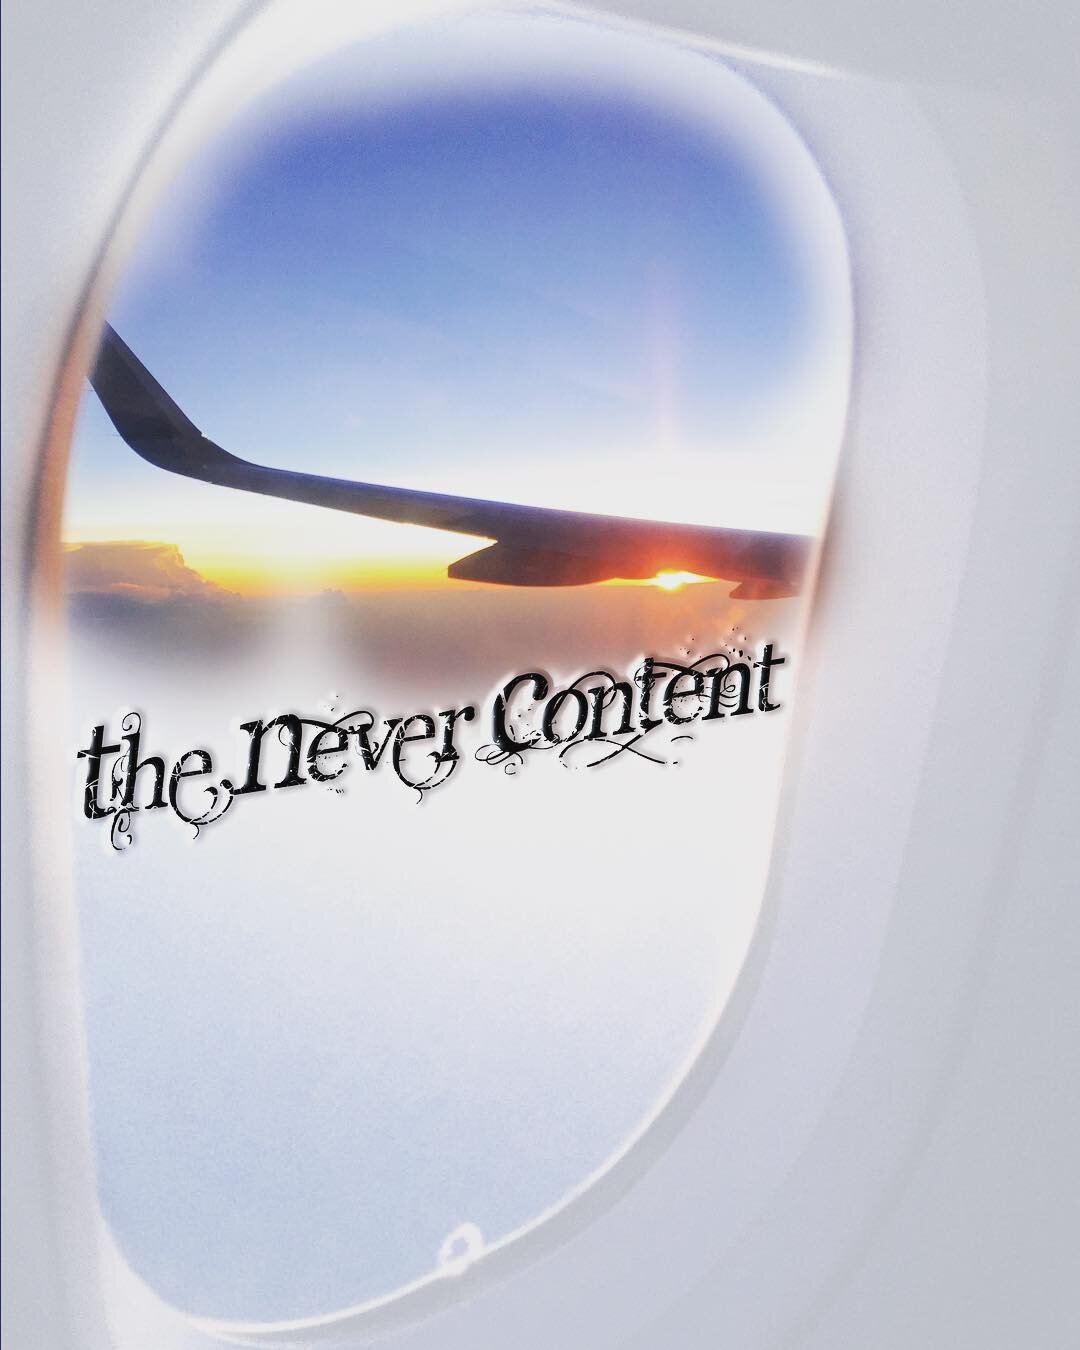 New music by &ldquo;The Never Content&rdquo; will soon be flying in on a jet plane, but until then...sit back &amp; enjoy the ride with our first three albums. 😎🎵🎶 #musicians #ilovemusic #musicislife #newyorkcity #lifeisbeautiful #electronicmusic 